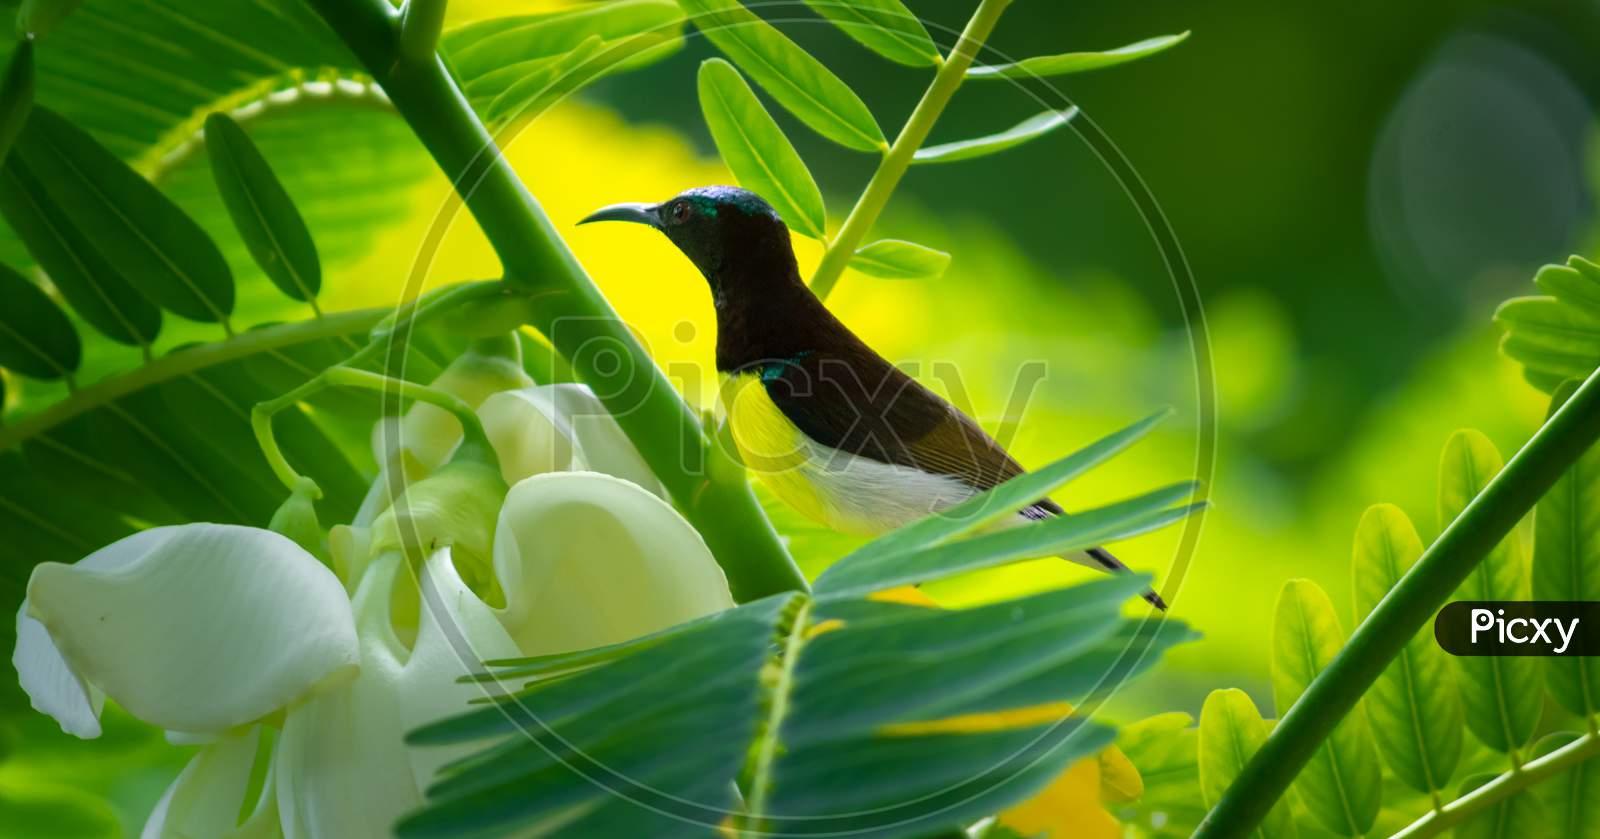 Crimson Backed Sunbird Perched On A Branch, Looking For A Flower For A Sip Of Nectar